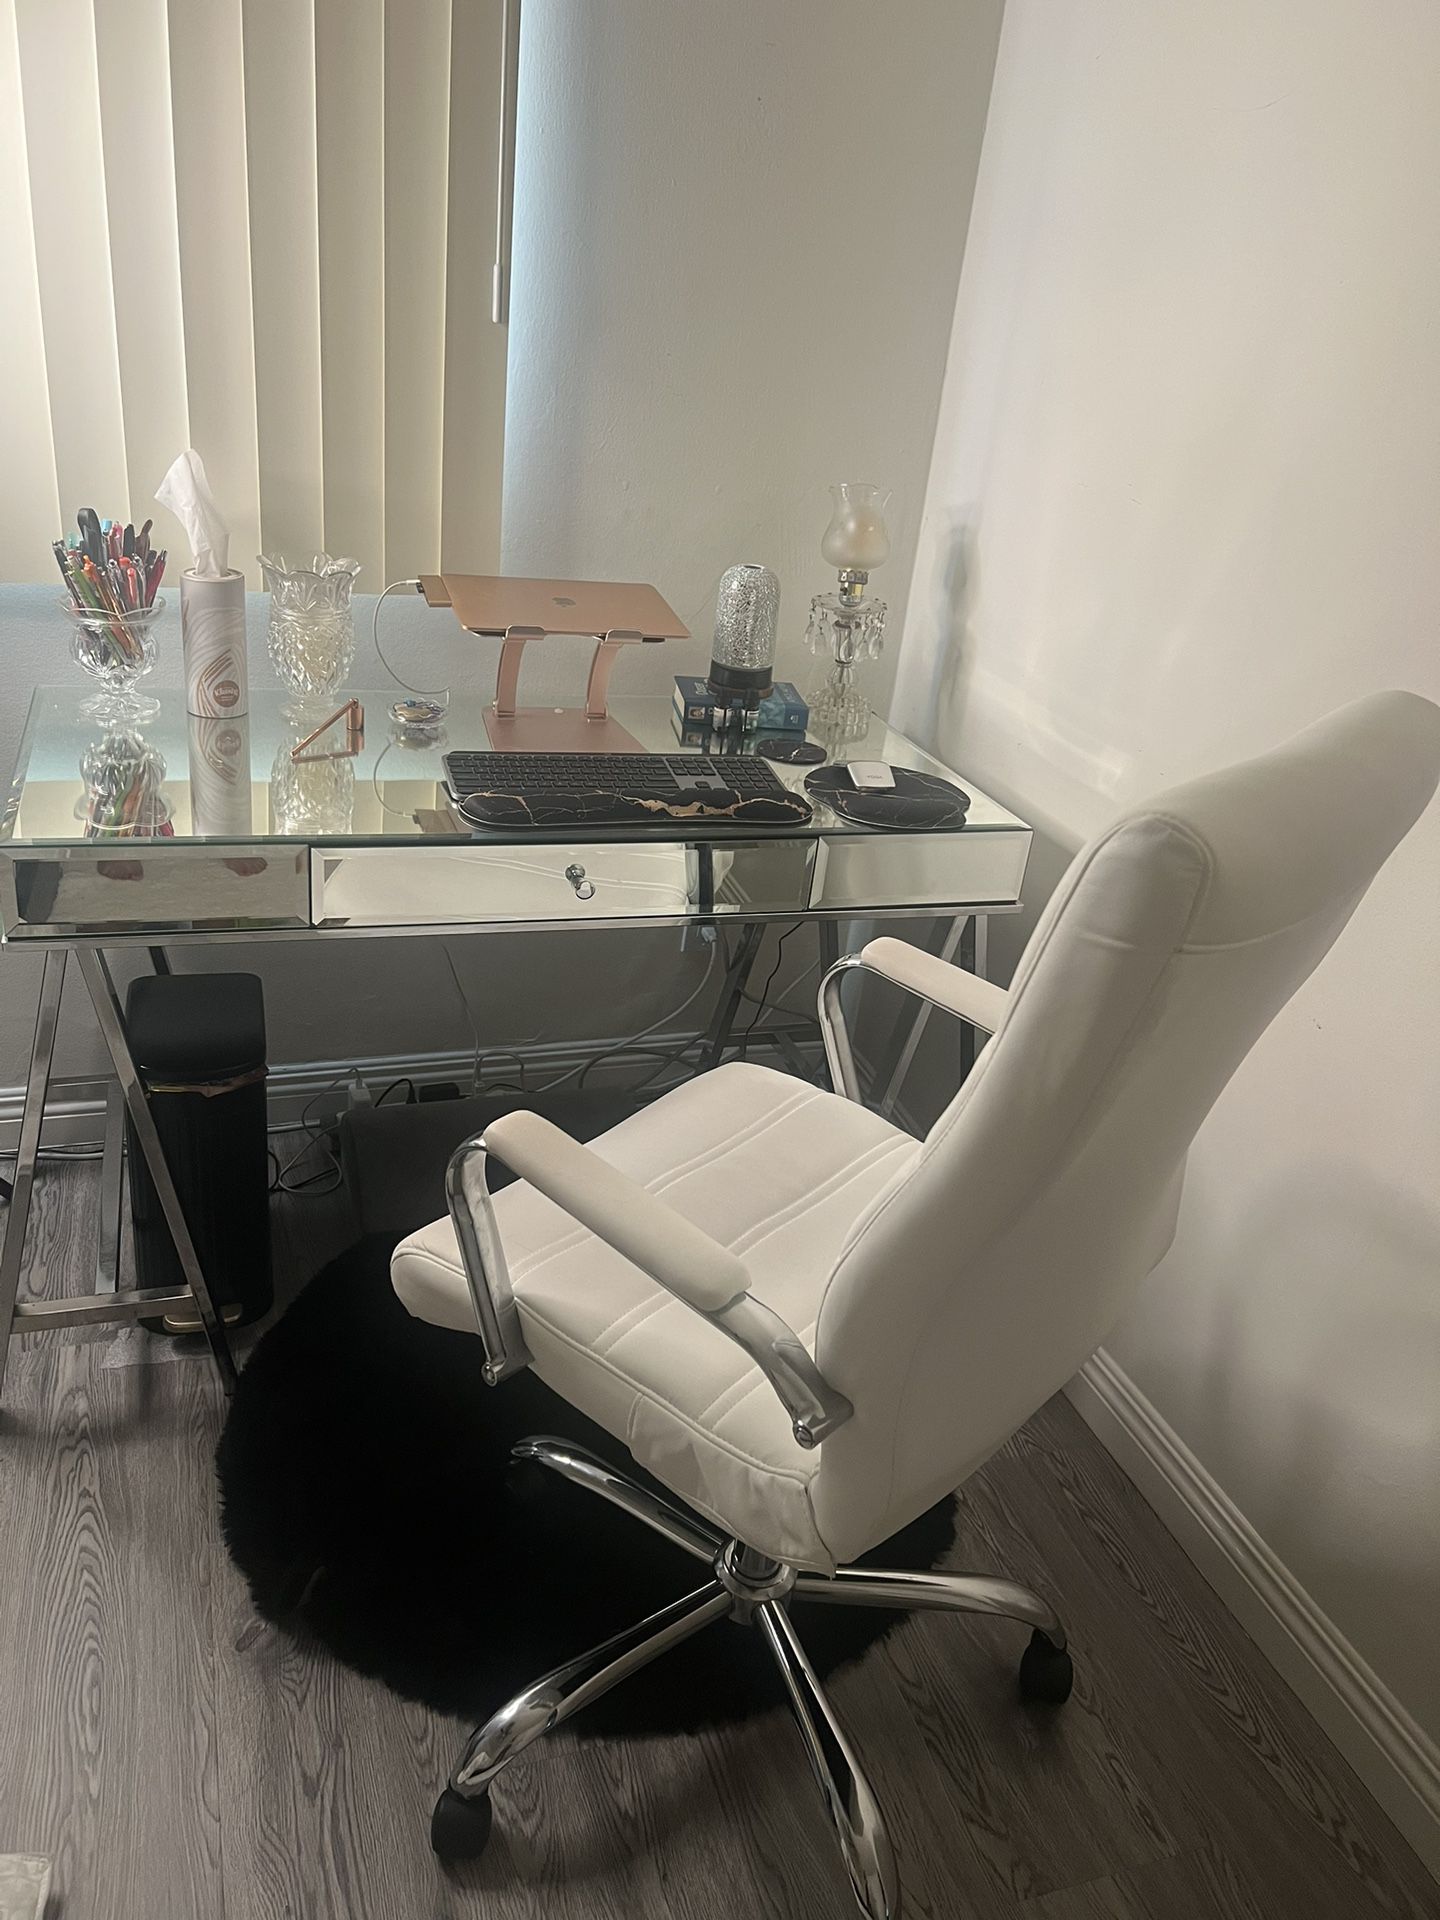 Mirrored Desk & Chair $350 OBO MUST GO! 